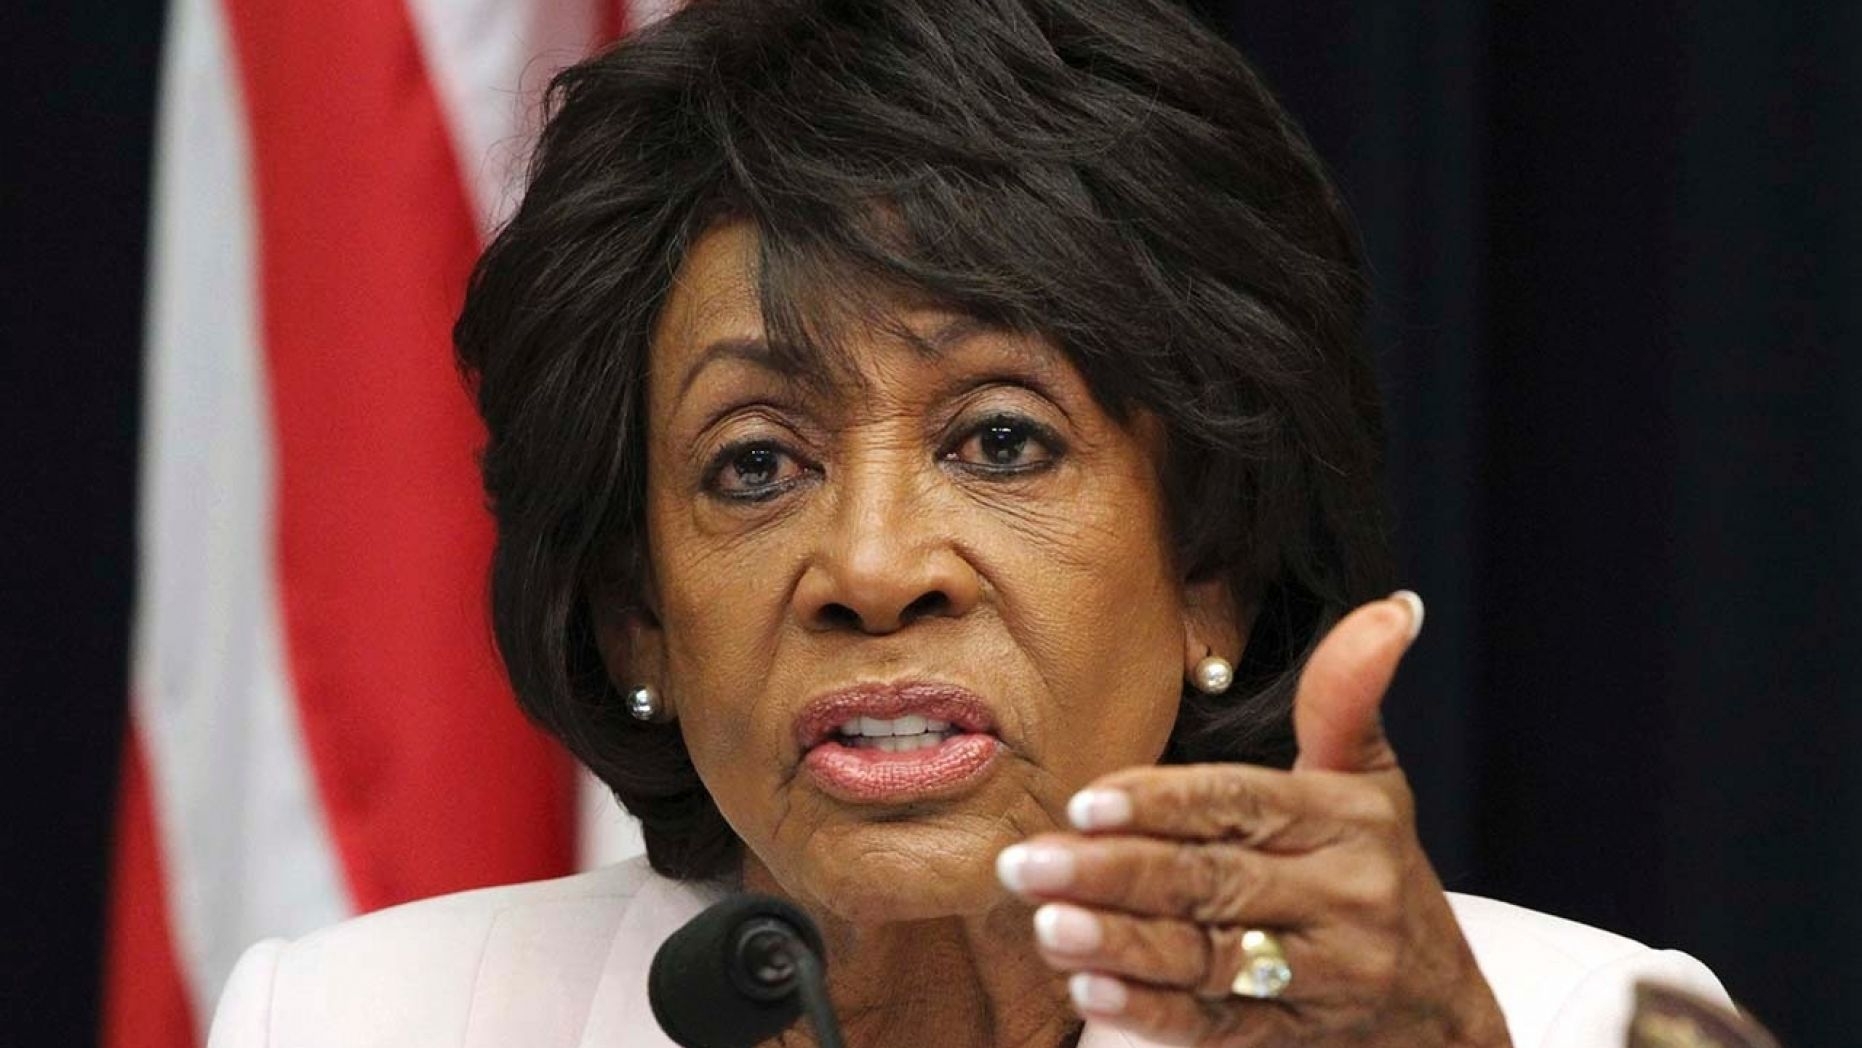 Maxine Waters wins media award, uses speech to bad-mouth Trump to newspaper publishers: ‘I don’t like him’